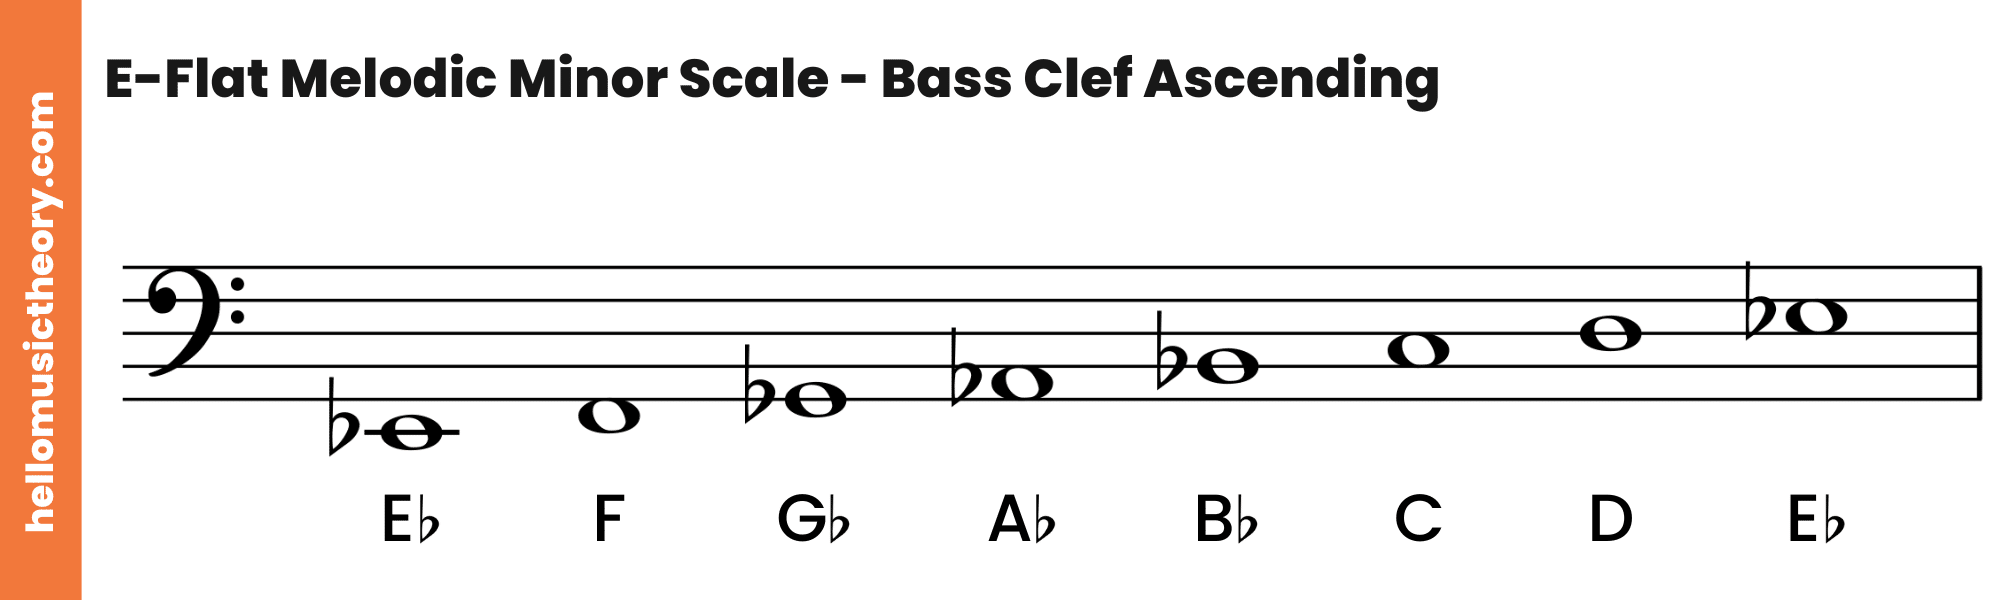 E-Flat Melodic Minor Scale Bass Clef Ascending